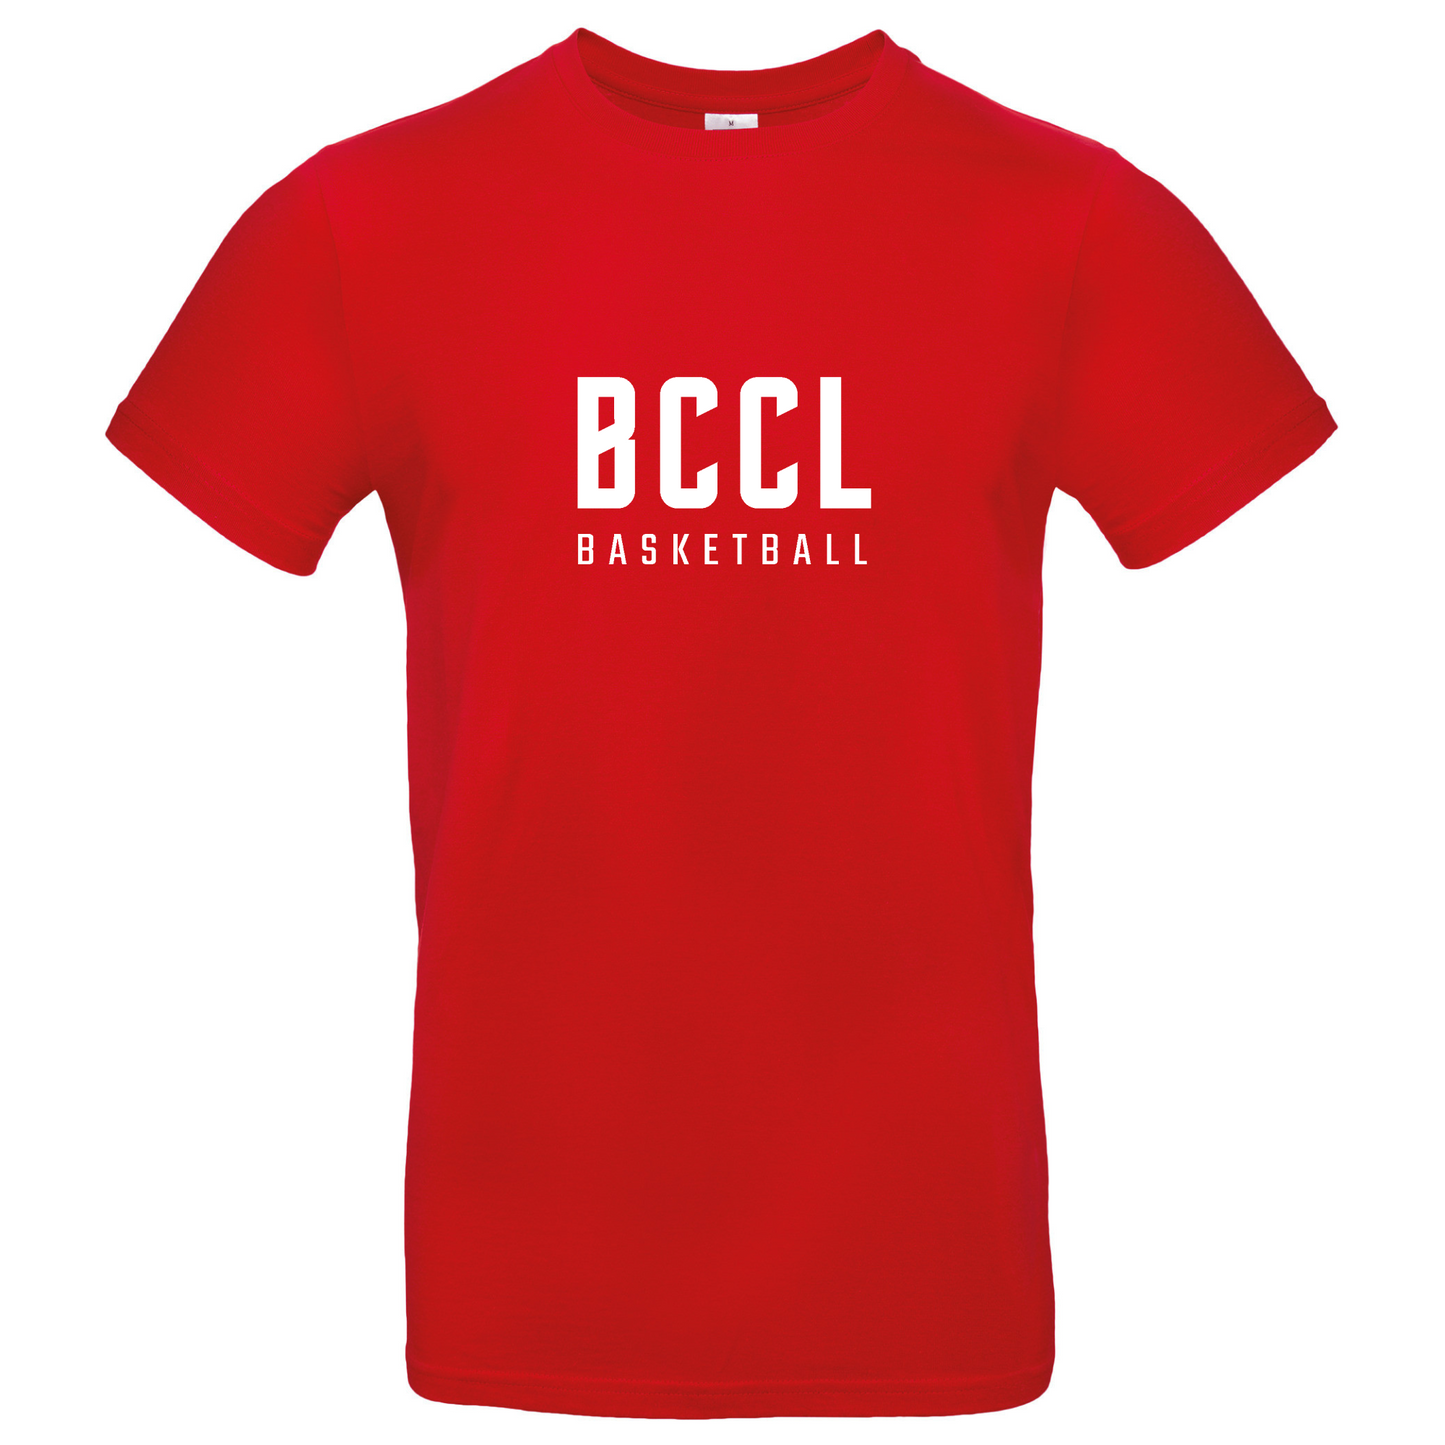 Tee-shirt BCCL homme